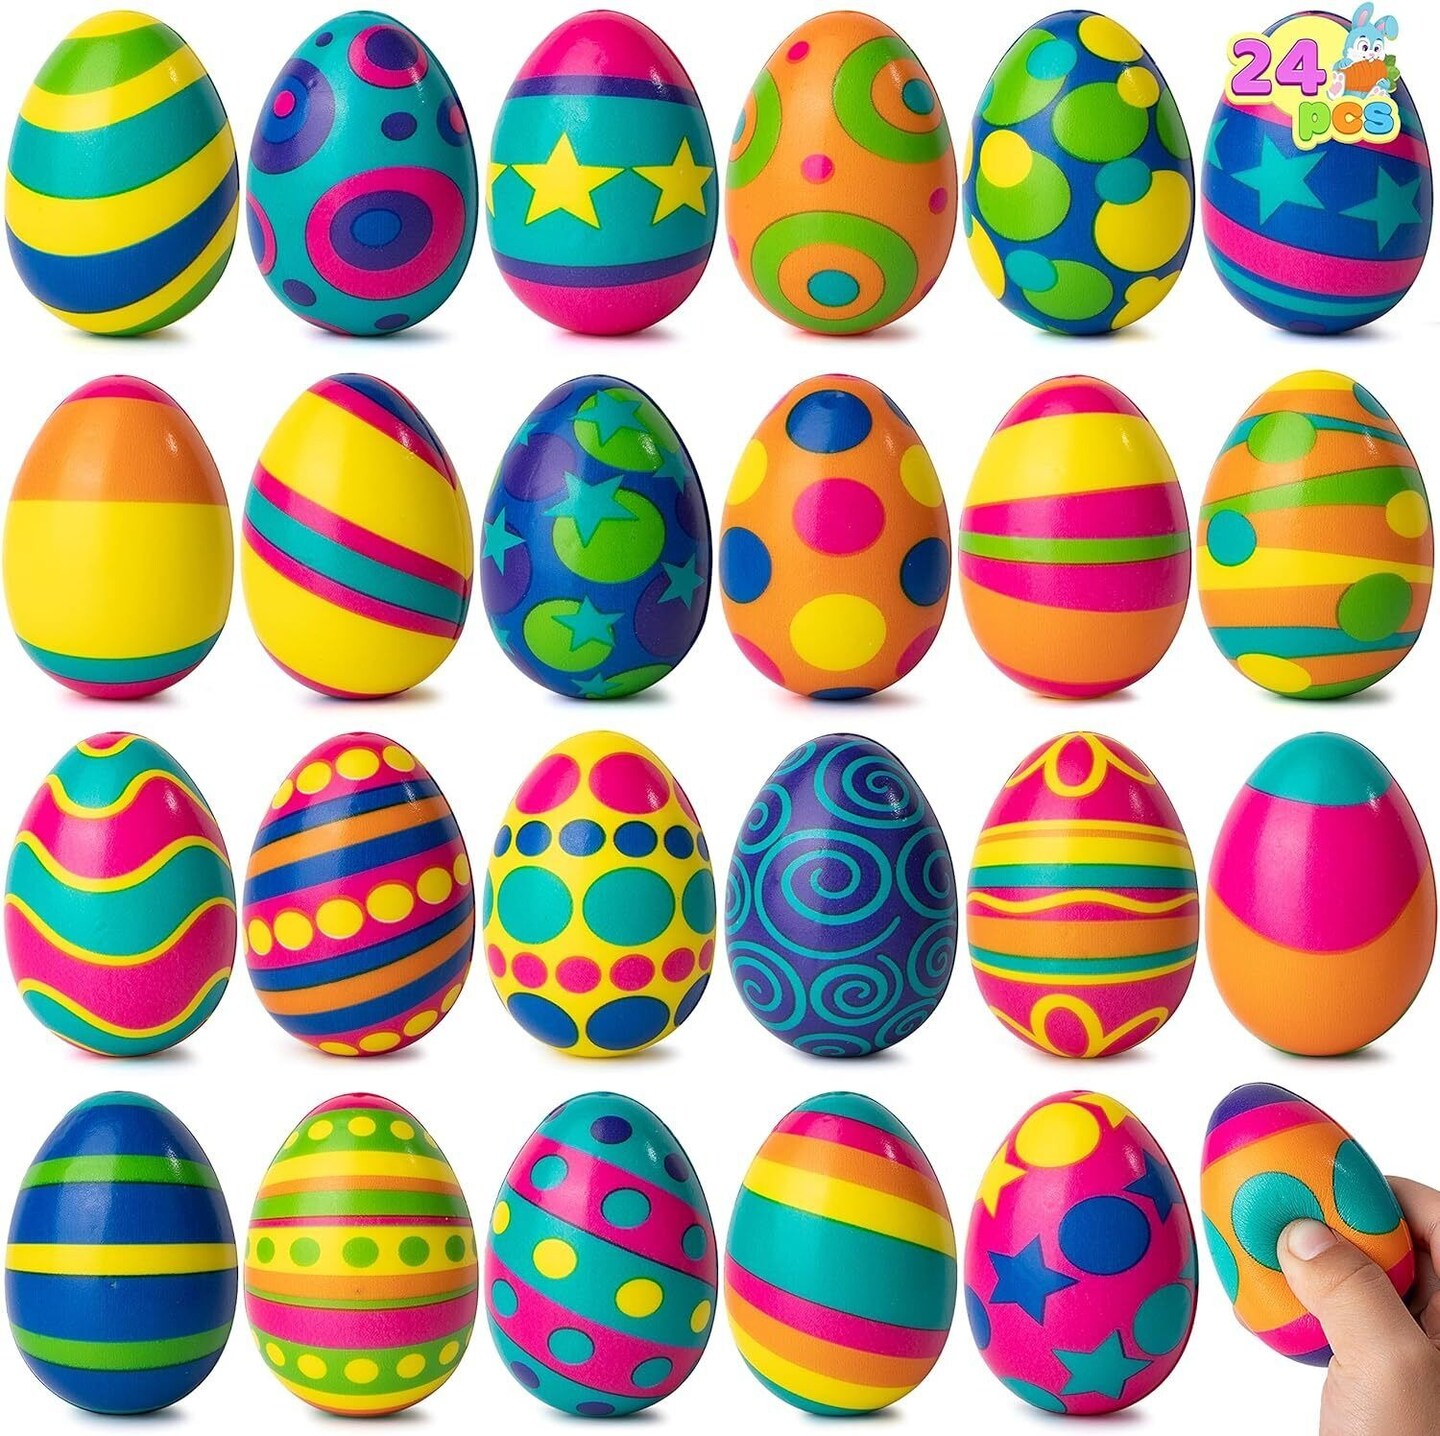 24 PCS Colorful and Squishy Toy Eggs for Easter Eggs Hunt, Stress Relief